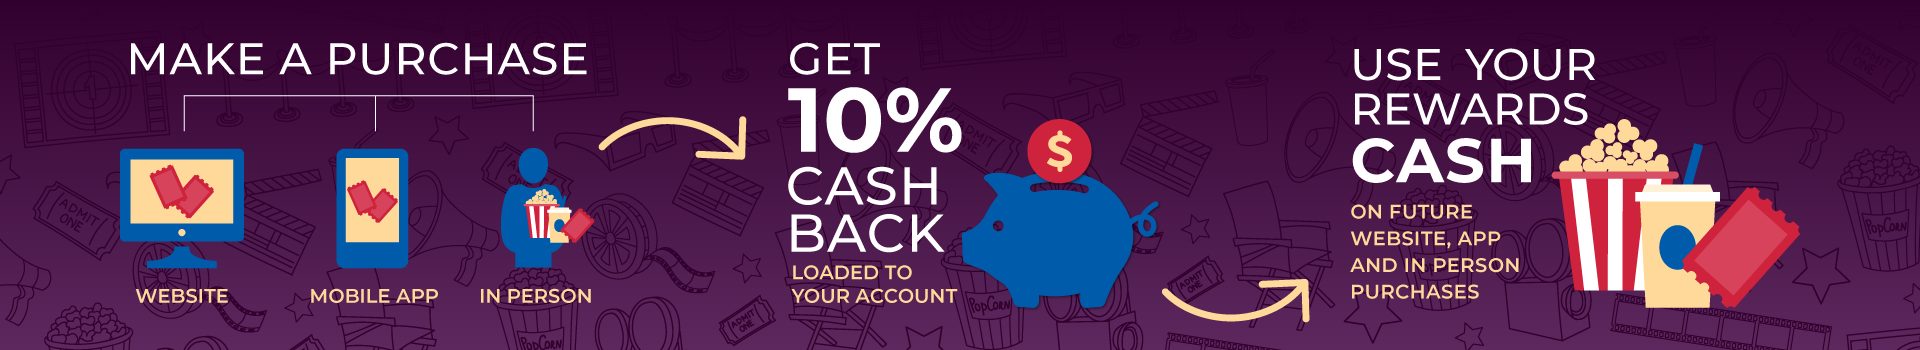 Make a Purchase on the website or mobile app, or in person, GET 10% CASH BACK loaded to your account, use your REWARDS CASH on future purchases on the website, app or in person